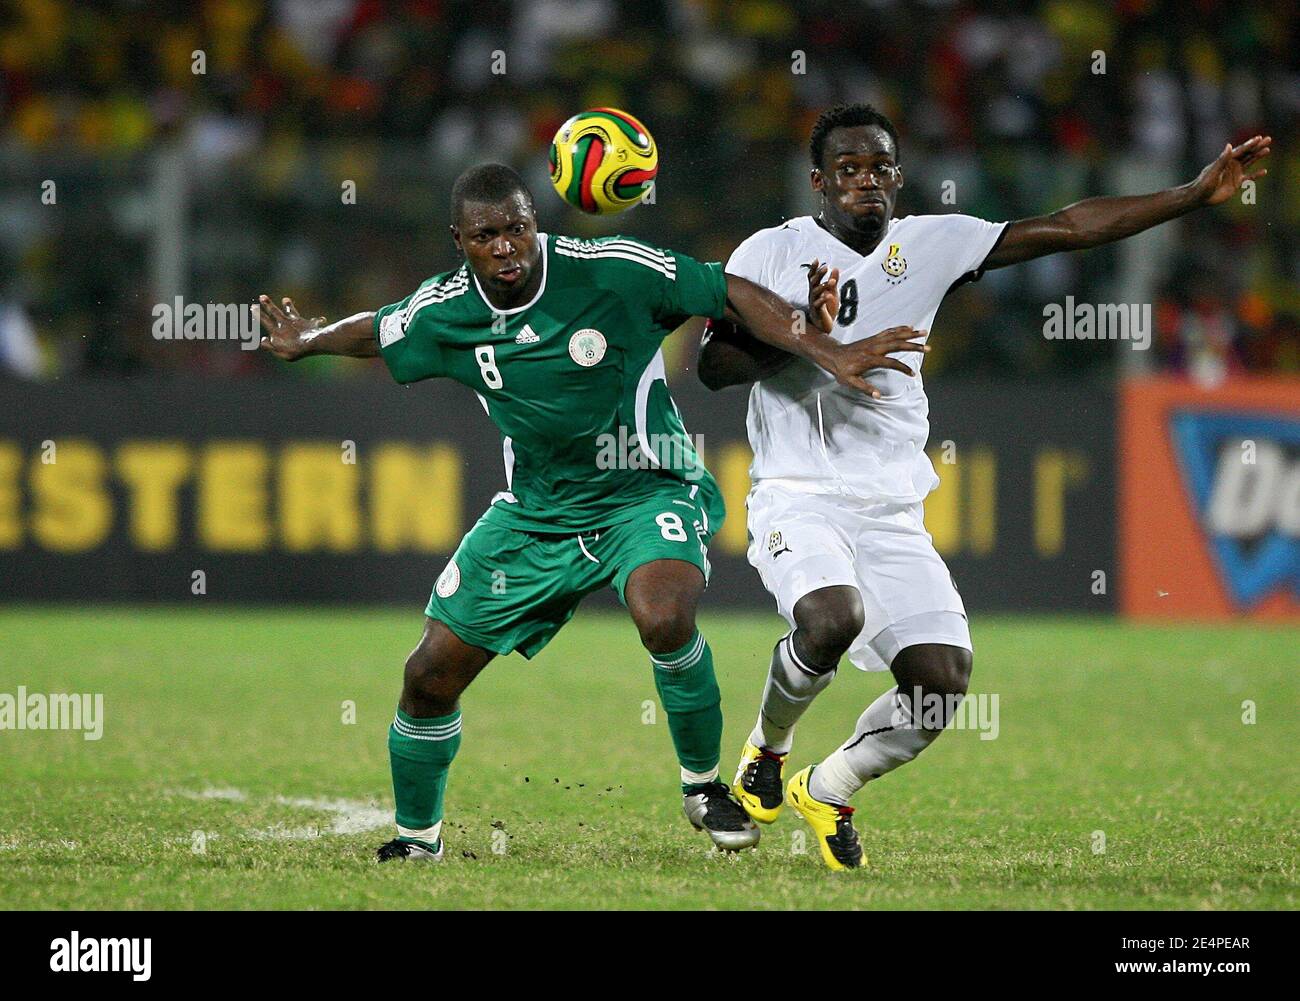 Nigeria's Yakubu Ayegbeni and Ghana's Essien Michael battle for the ball during the African Cup of Nations, quarter finals, soccer match, Ghana vs Nigeria in Accra, Ghana on February 3, 2008. The Ghana won 2-1. Photo by Steeve McMay/Cameleon/ABACAPRESS.COM Stock Photo